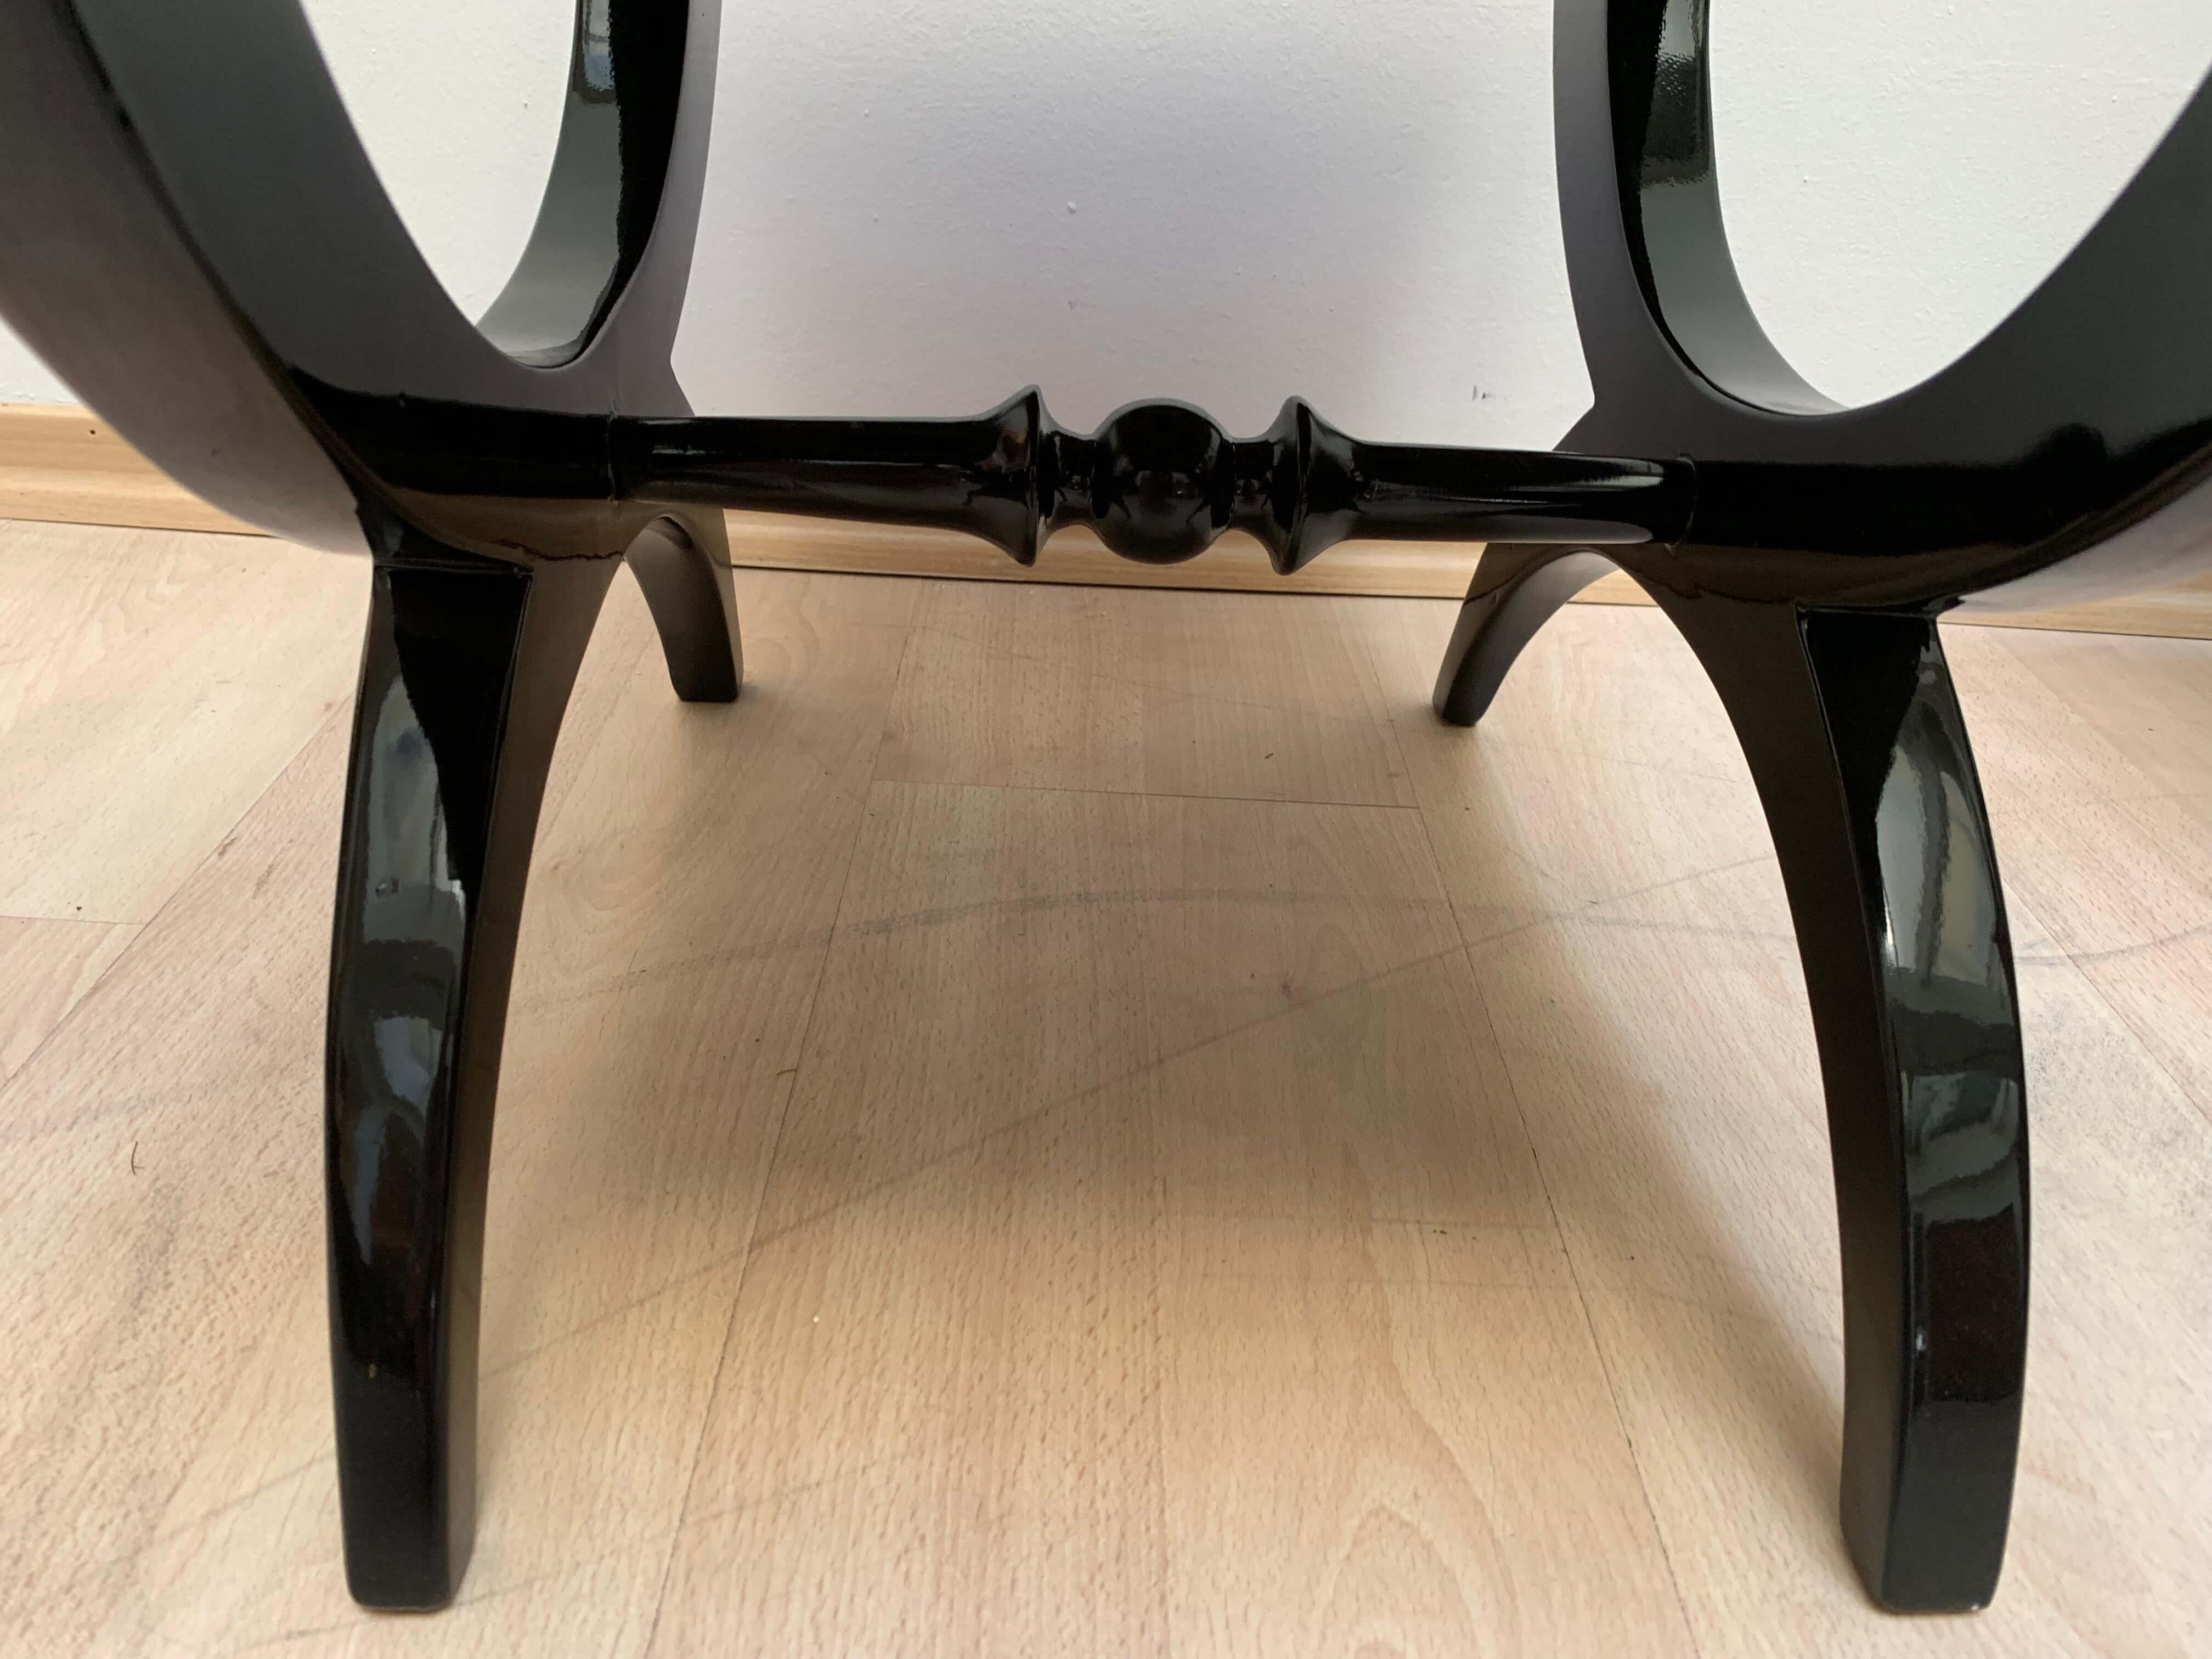 Lacquered Pair of Art Deco Stools / Tabourets, Black Lacquer, France, circa 1940